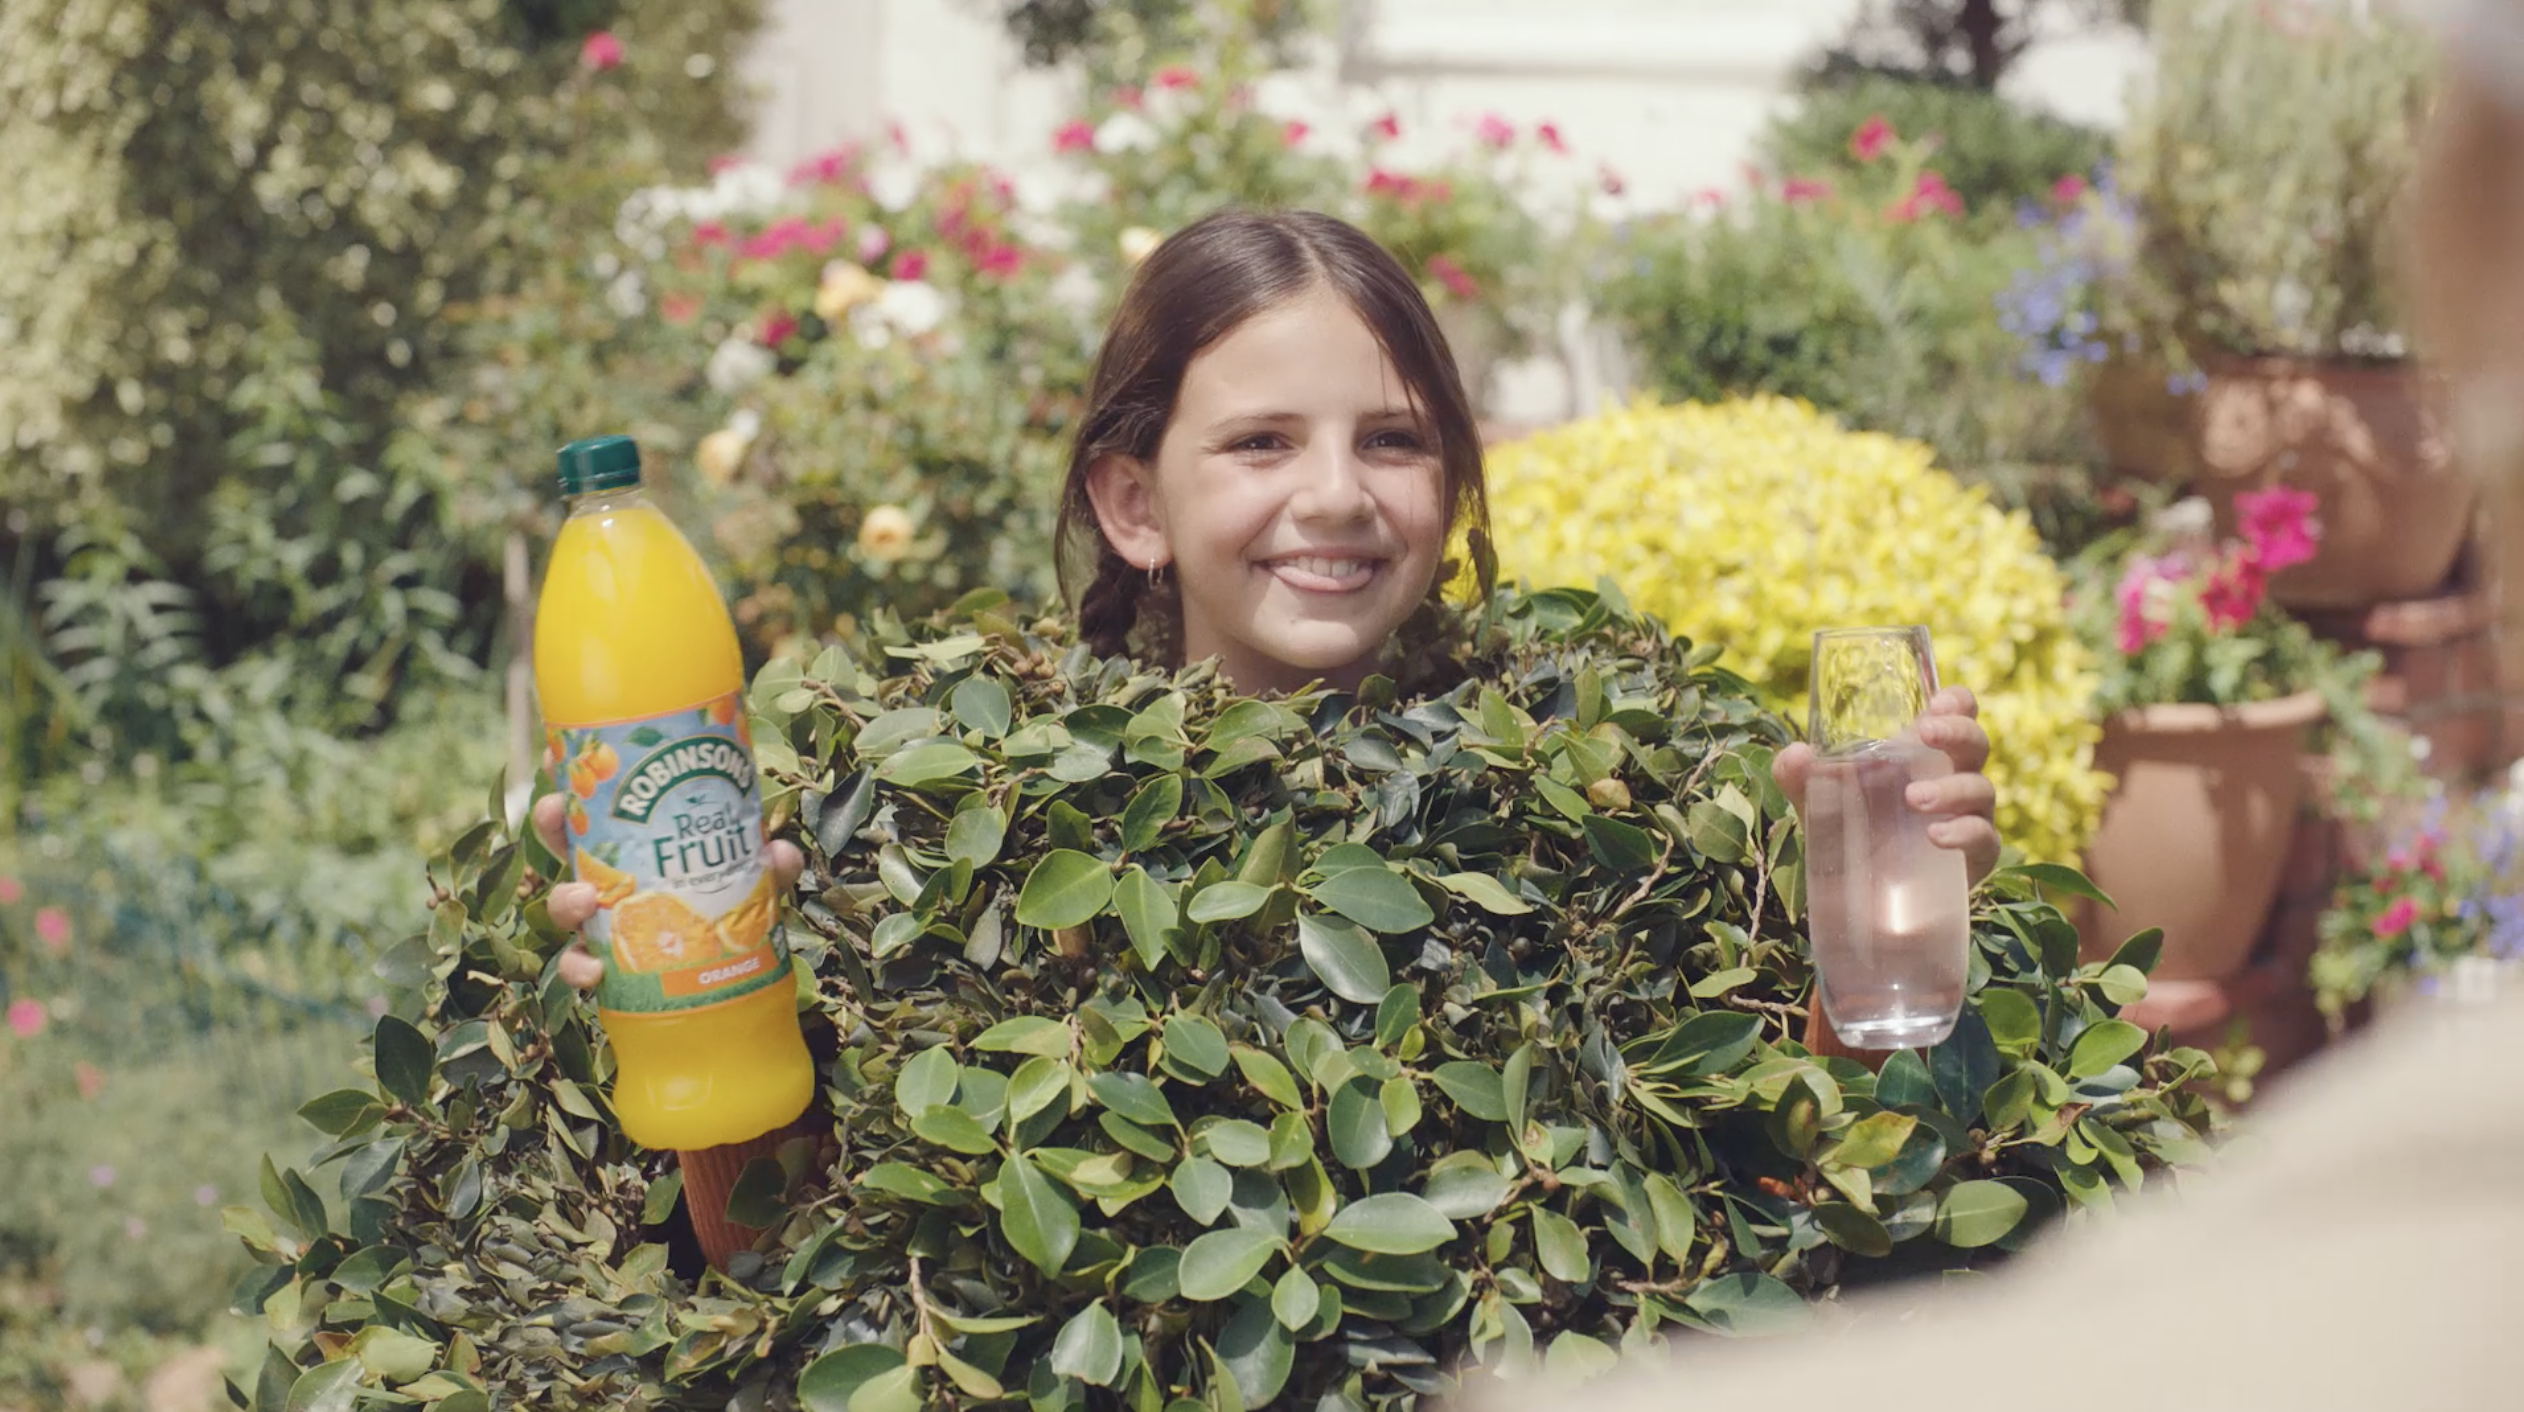 Robinsons returns to screens with £6.4m campaign